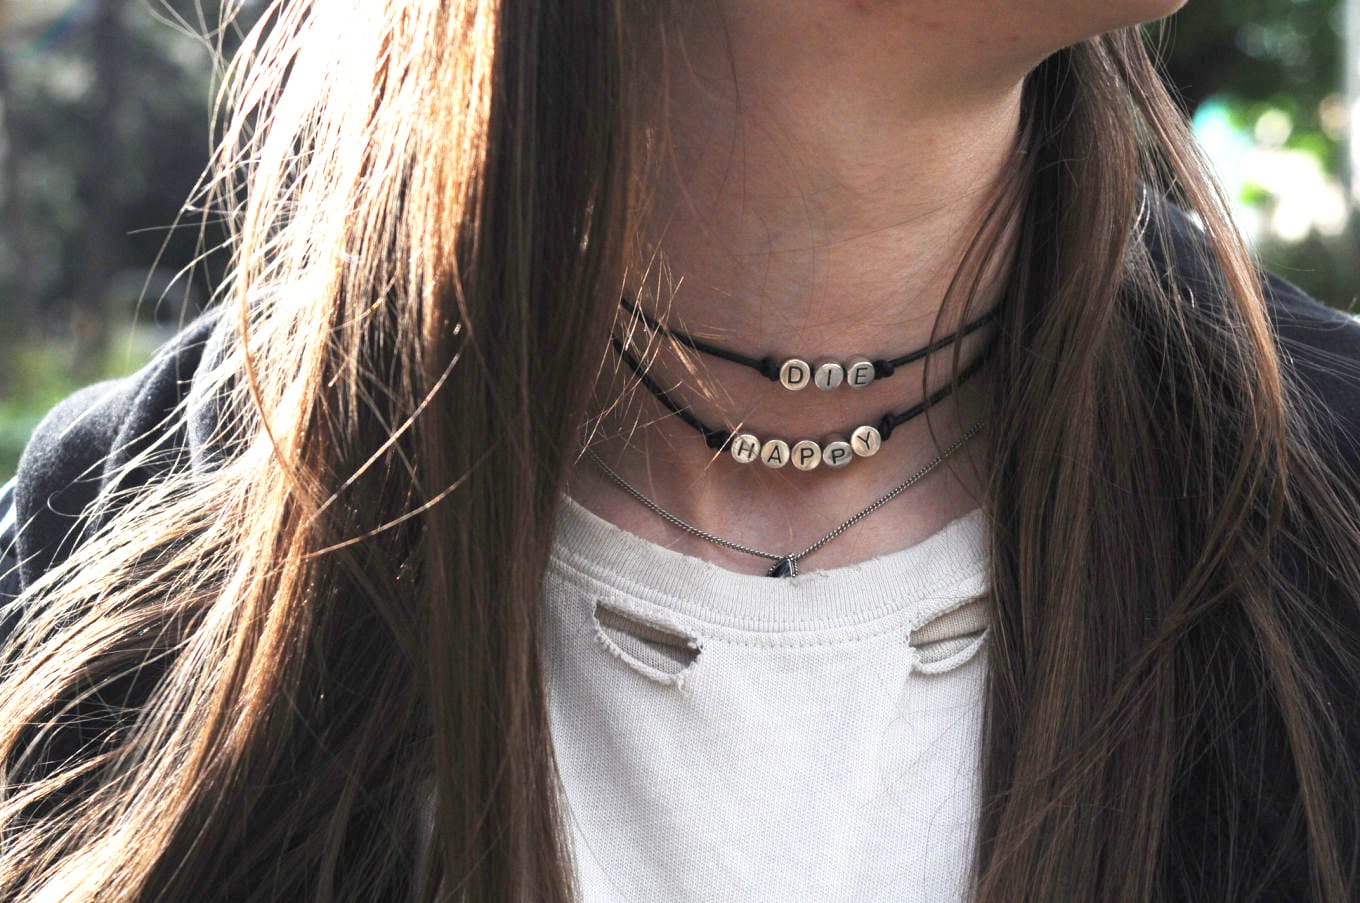 Die Happy choker necklace worn with a ripped white band tee shirt and leather jacket